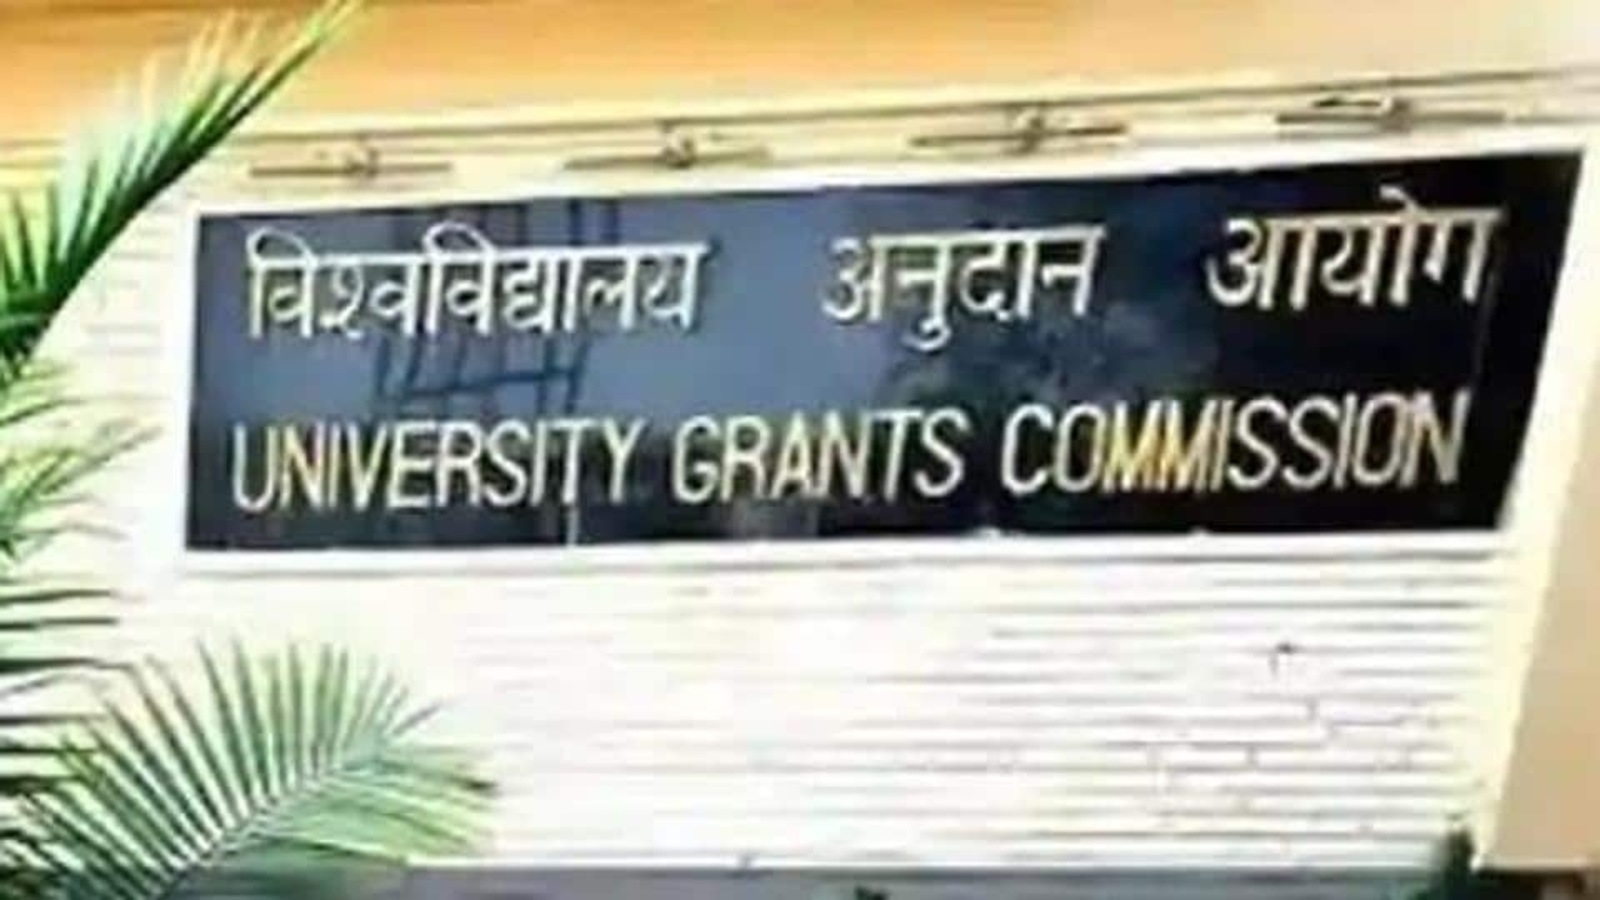 Teachers’ Day 2022: UGC to launch new fellowships, research grants